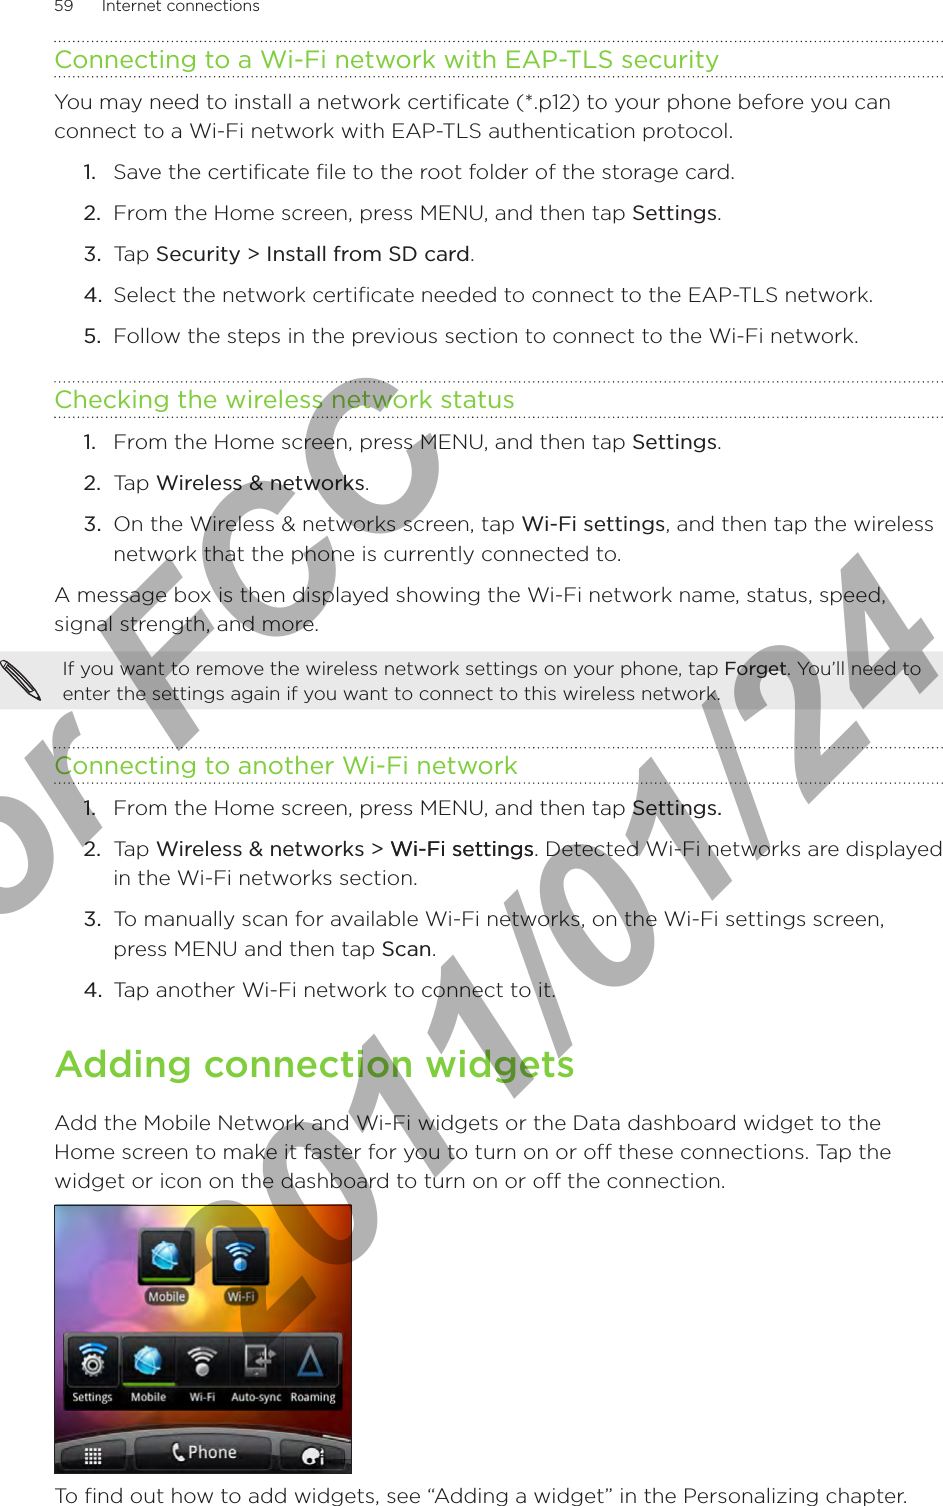 59      Internet connections      Connecting to a Wi-Fi network with EAP-TLS securityYou may need to install a network certificate (*.p12) to your phone before you can connect to a Wi-Fi network with EAP-TLS authentication protocol.Save the certificate file to the root folder of the storage card.From the Home screen, press MENU, and then tap Settings.Tap Security &gt; Install from SD card.Select the network certificate needed to connect to the EAP-TLS network.Follow the steps in the previous section to connect to the Wi-Fi network.Checking the wireless network statusFrom the Home screen, press MENU, and then tap Settings.Tap Wireless &amp; networks.On the Wireless &amp; networks screen, tap Wi-Fi settings, and then tap the wireless network that the phone is currently connected to.A message box is then displayed showing the Wi-Fi network name, status, speed, signal strength, and more.If you want to remove the wireless network settings on your phone, tap Forget. You’ll need to enter the settings again if you want to connect to this wireless network.Connecting to another Wi-Fi networkFrom the Home screen, press MENU, and then tap Settings. Tap Wireless &amp; networks &gt; Wi-Fi settingsWi-Fi settings. Detected Wi-Fi networks are displayed in the Wi-Fi networks section.To manually scan for available Wi-Fi networks, on the Wi-Fi settings screen, press MENU and then tap Scan.Tap another Wi-Fi network to connect to it.Adding connection widgetsAdd the Mobile Network and Wi-Fi widgets or the Data dashboard widget to the Home screen to make it faster for you to turn on or off these connections. Tap the widget or icon on the dashboard to turn on or off the connection. To find out how to add widgets, see “Adding a widget” in the Personalizing chapter.1.2.3.4.5.1.2.3.1.2.3.4.For FCC  2011/01/24